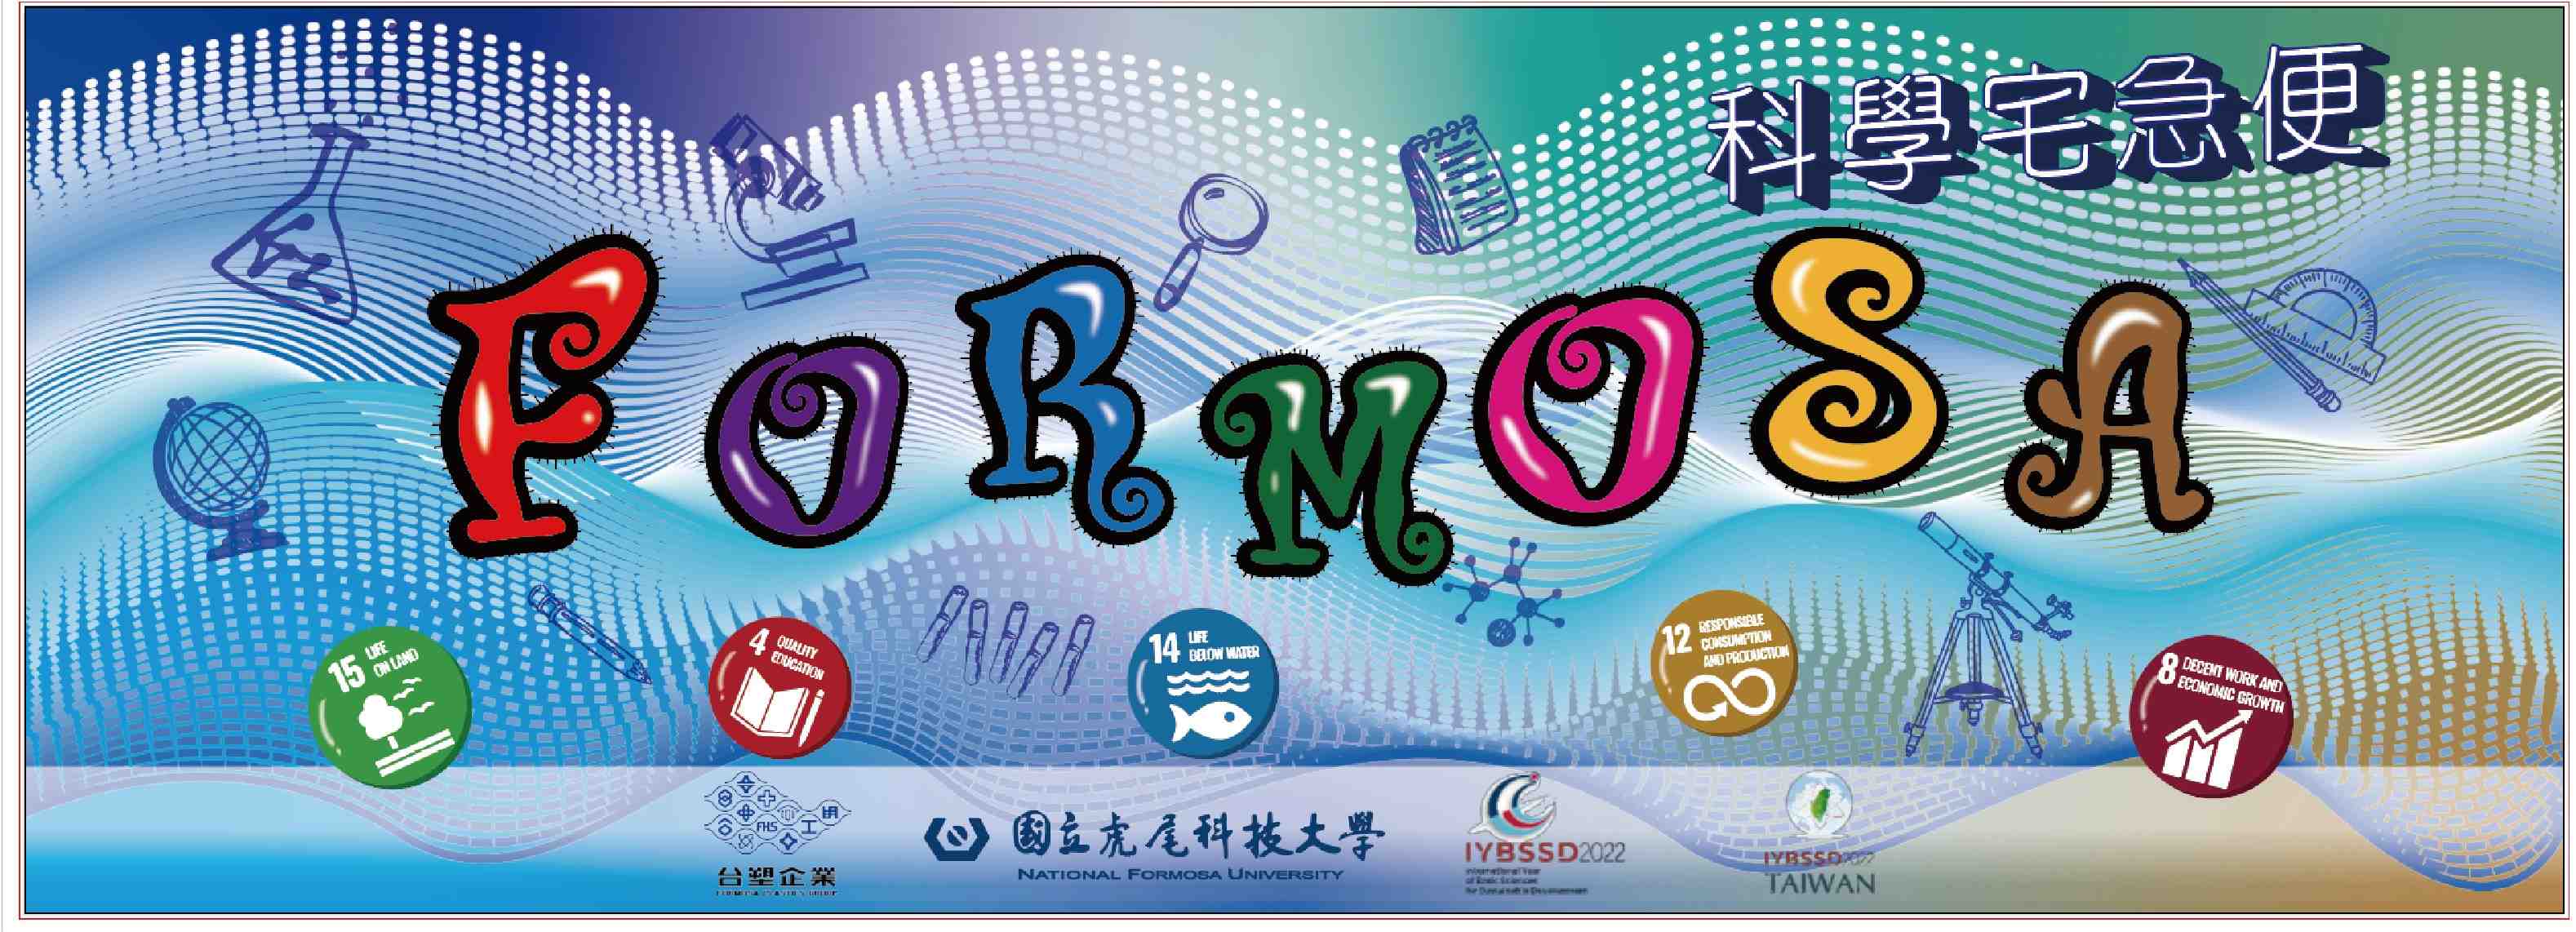 Formosa科學探索營 Promotional Graphics or Posters